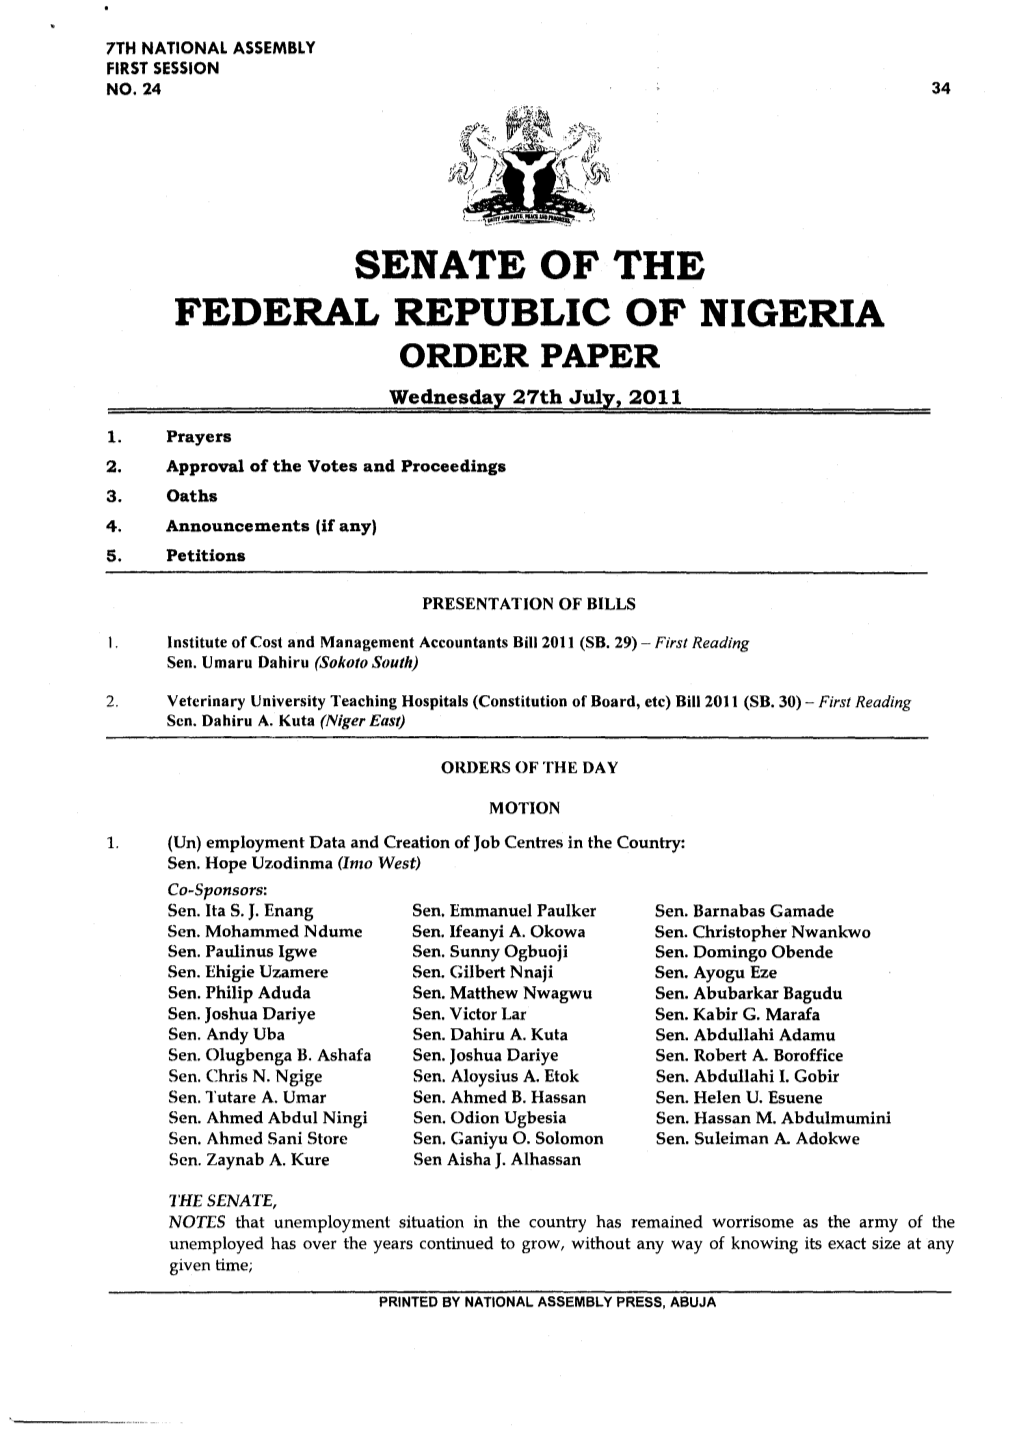 SENATE of the FEDERAL REPUBLIC of NIGERIA ORDER PAPER Wednesday 27Th July, 2011